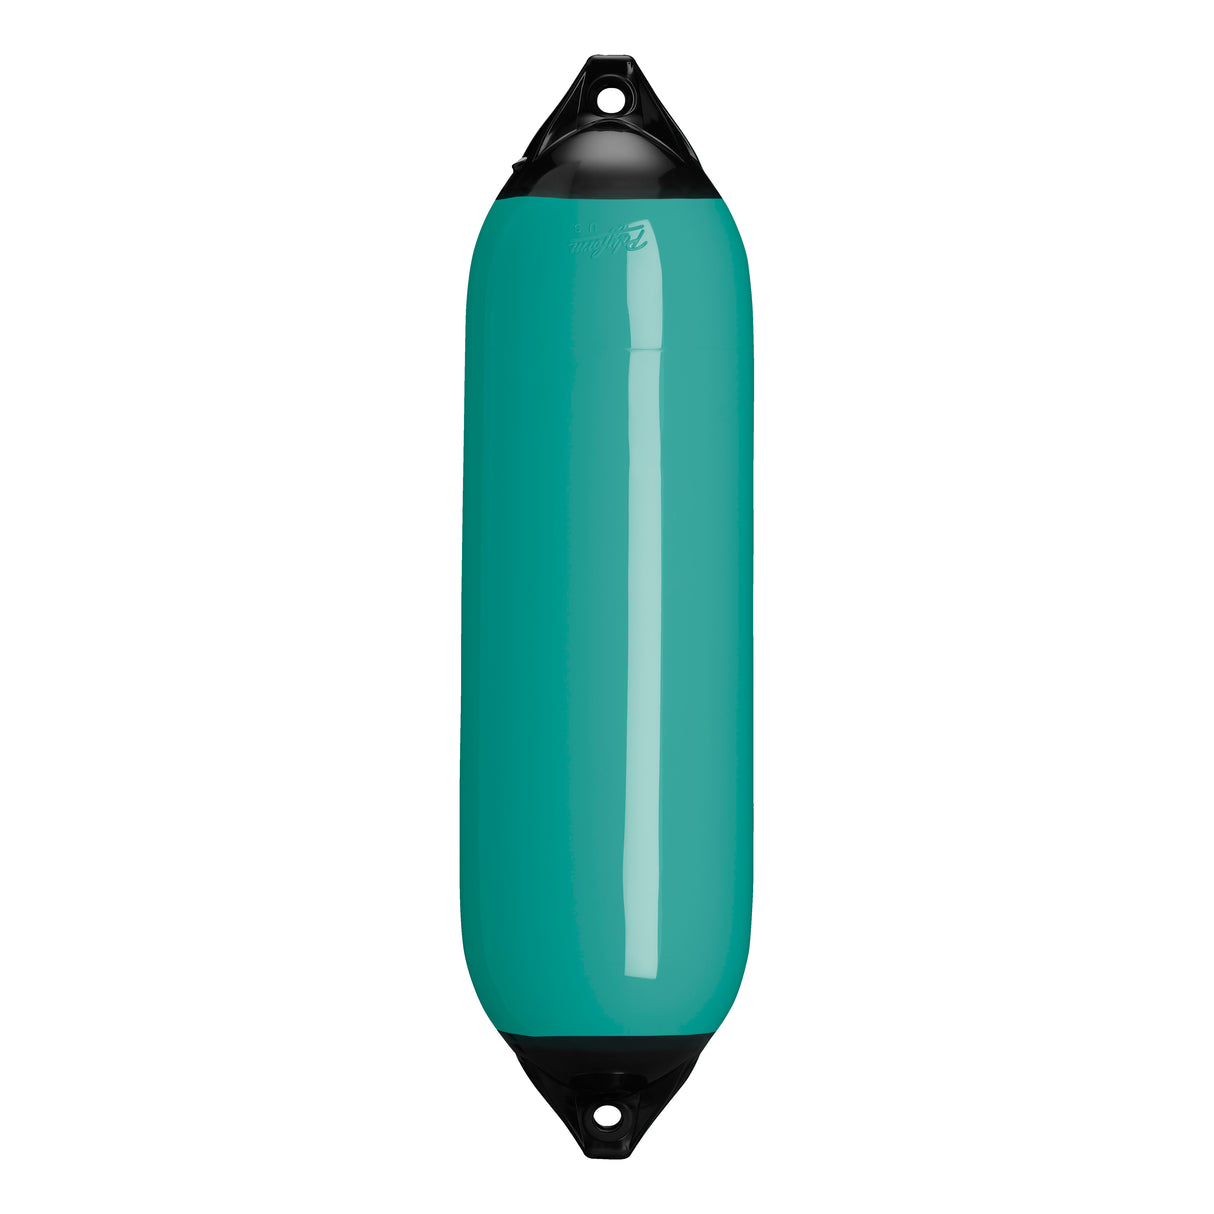 Teal boat fender with Black-Top, Polyform F-6